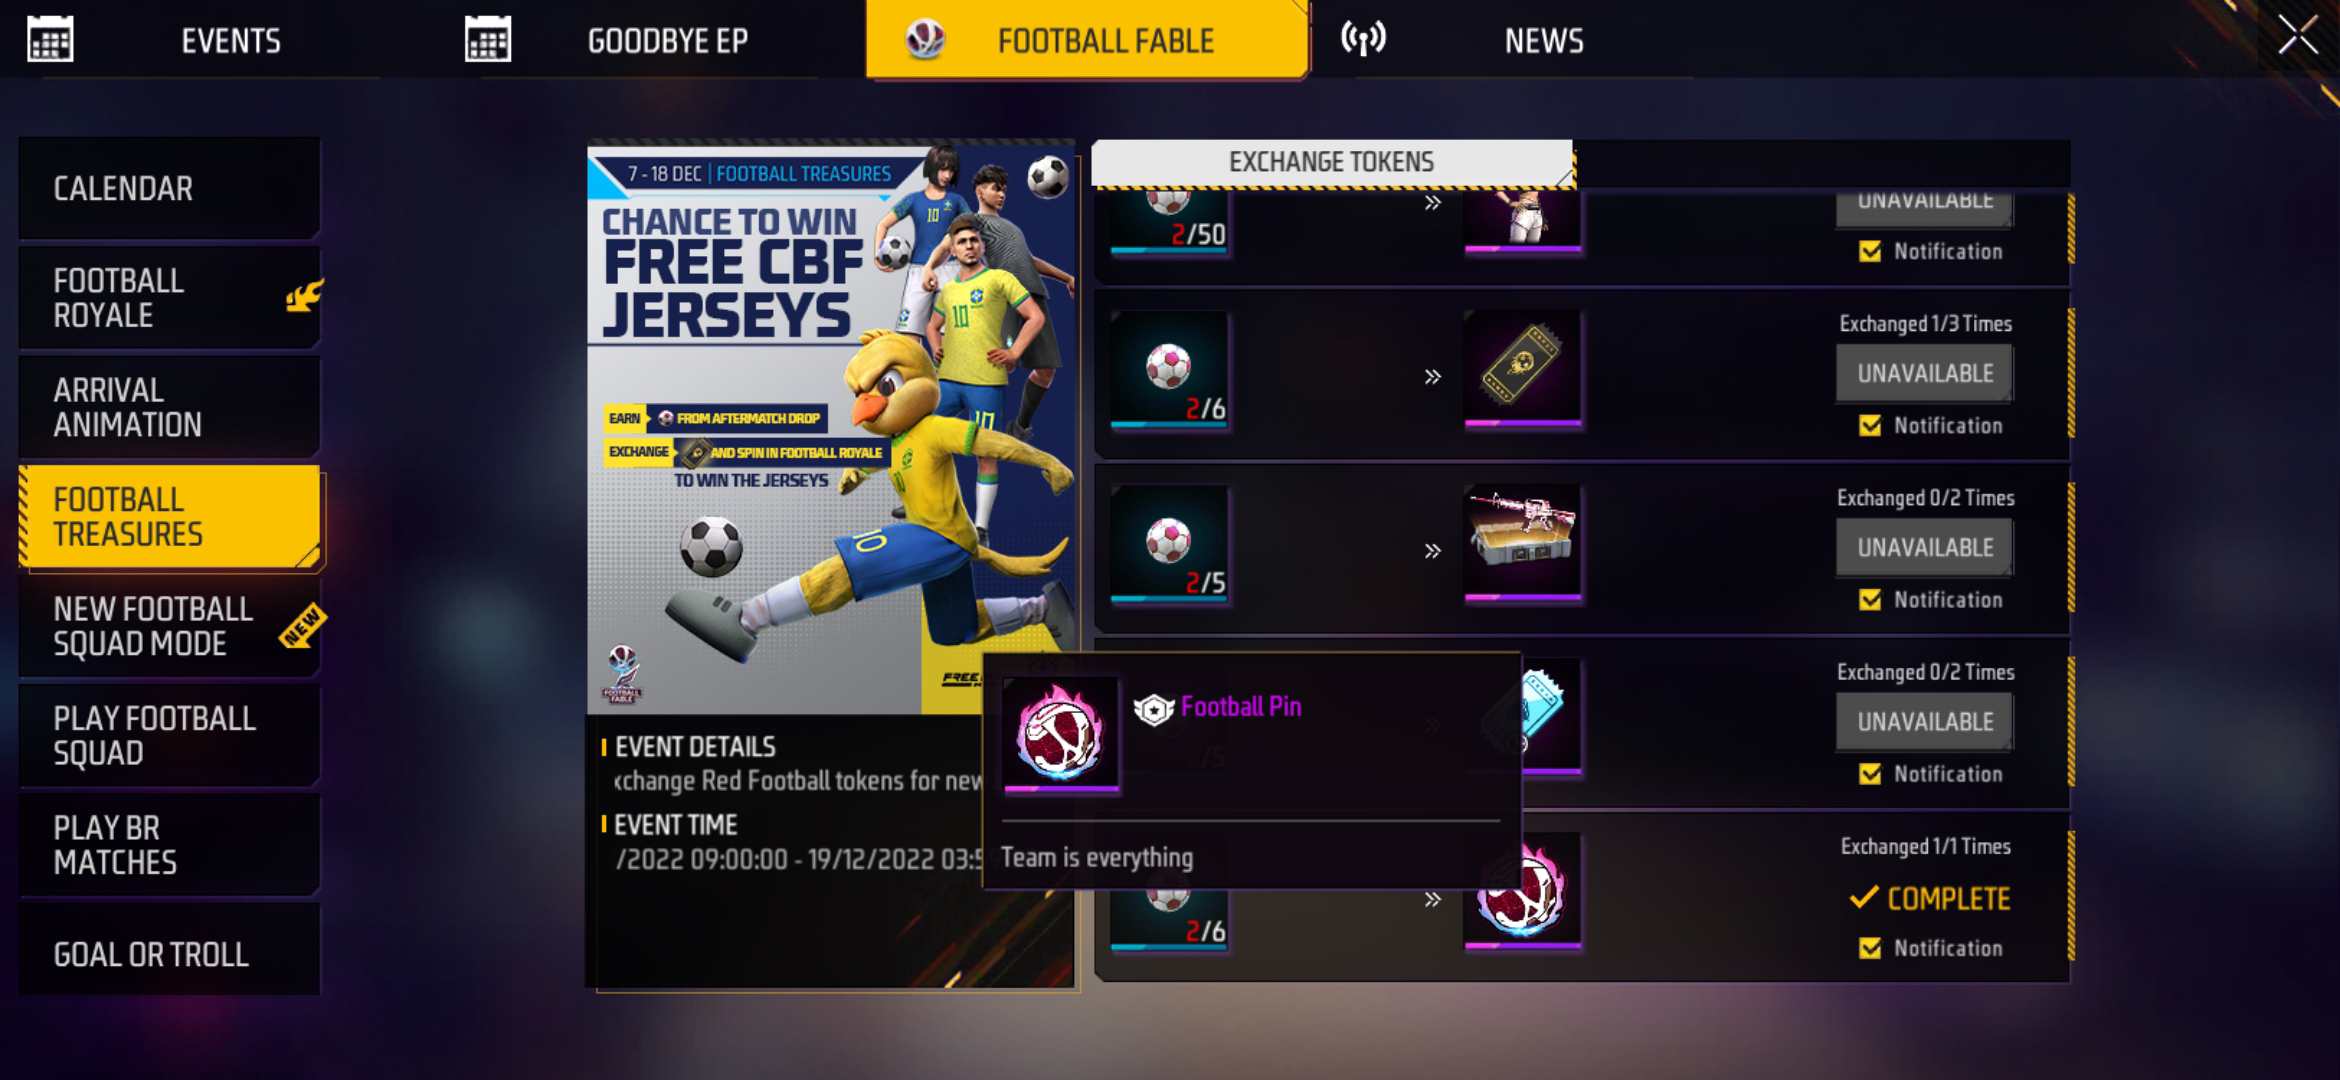 How To Get A Free Premium Jersey From Jersey Royale In Free Fire